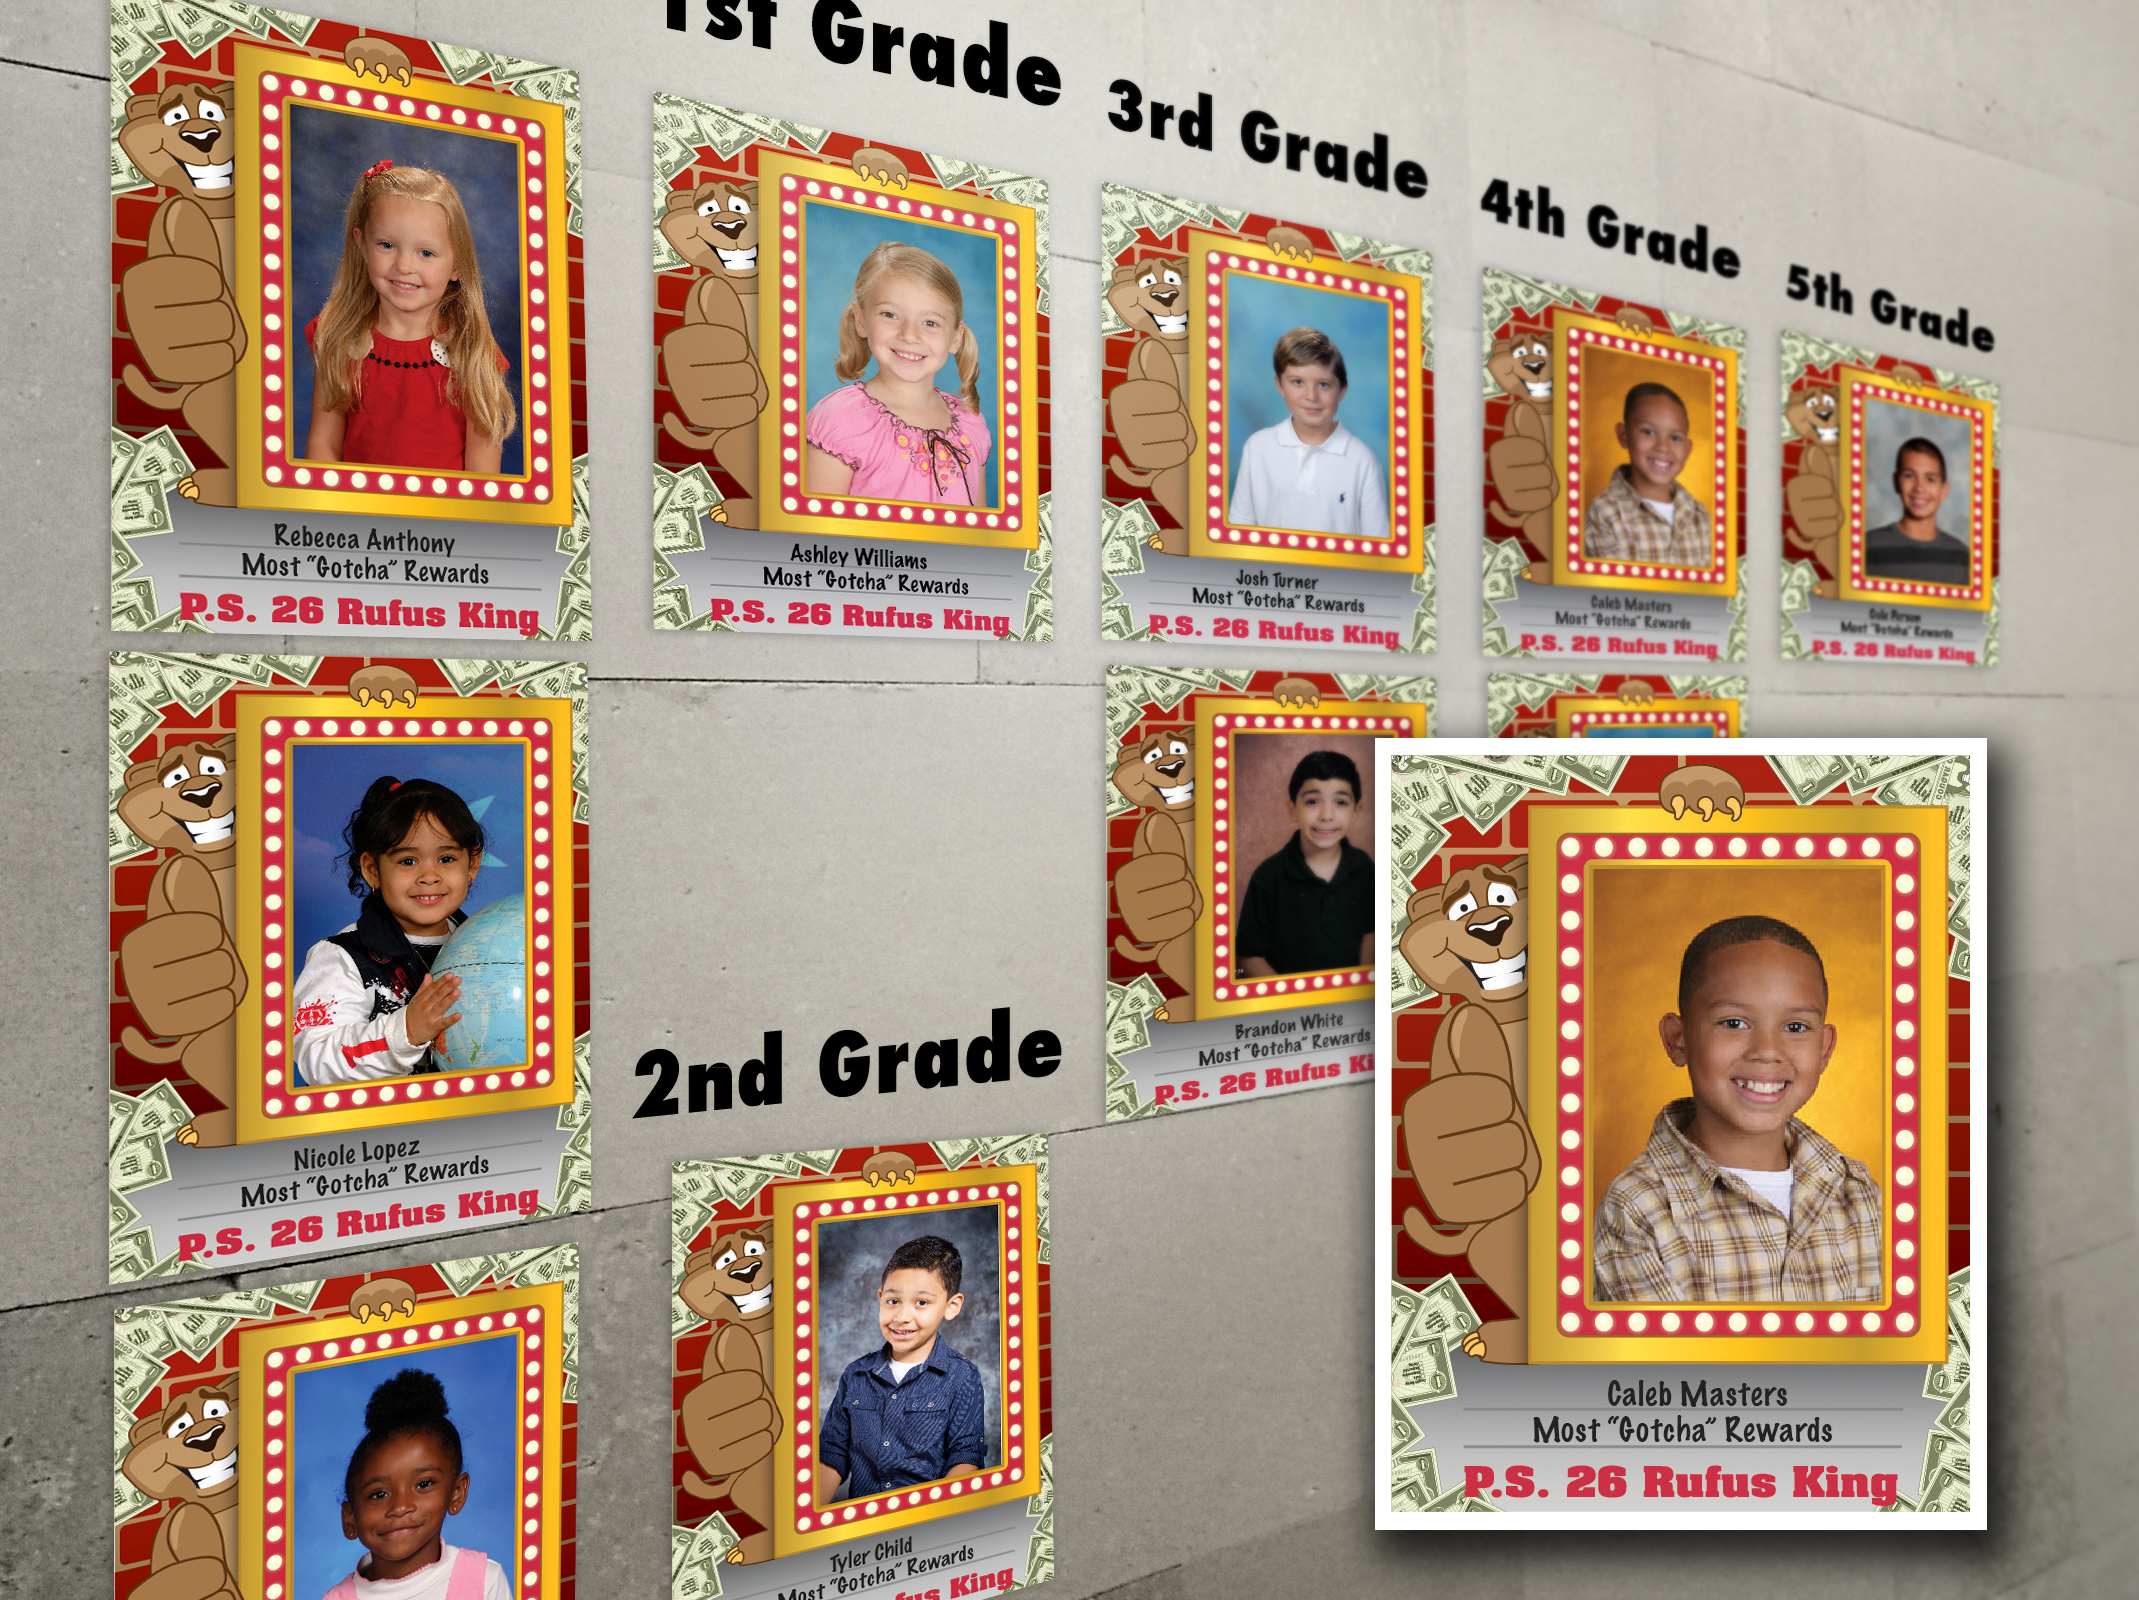 Recognize students positive behavior by showcasing them in these award frames. Print them out. Paste a photo of the student in the space provided. Write their name at the bottom. We'll even customize the design with your school's name and school colors. Print them on your own printer for an unlimited supply. Visit PBISteachingtools.com, or call 816-366-0199 to get yours.